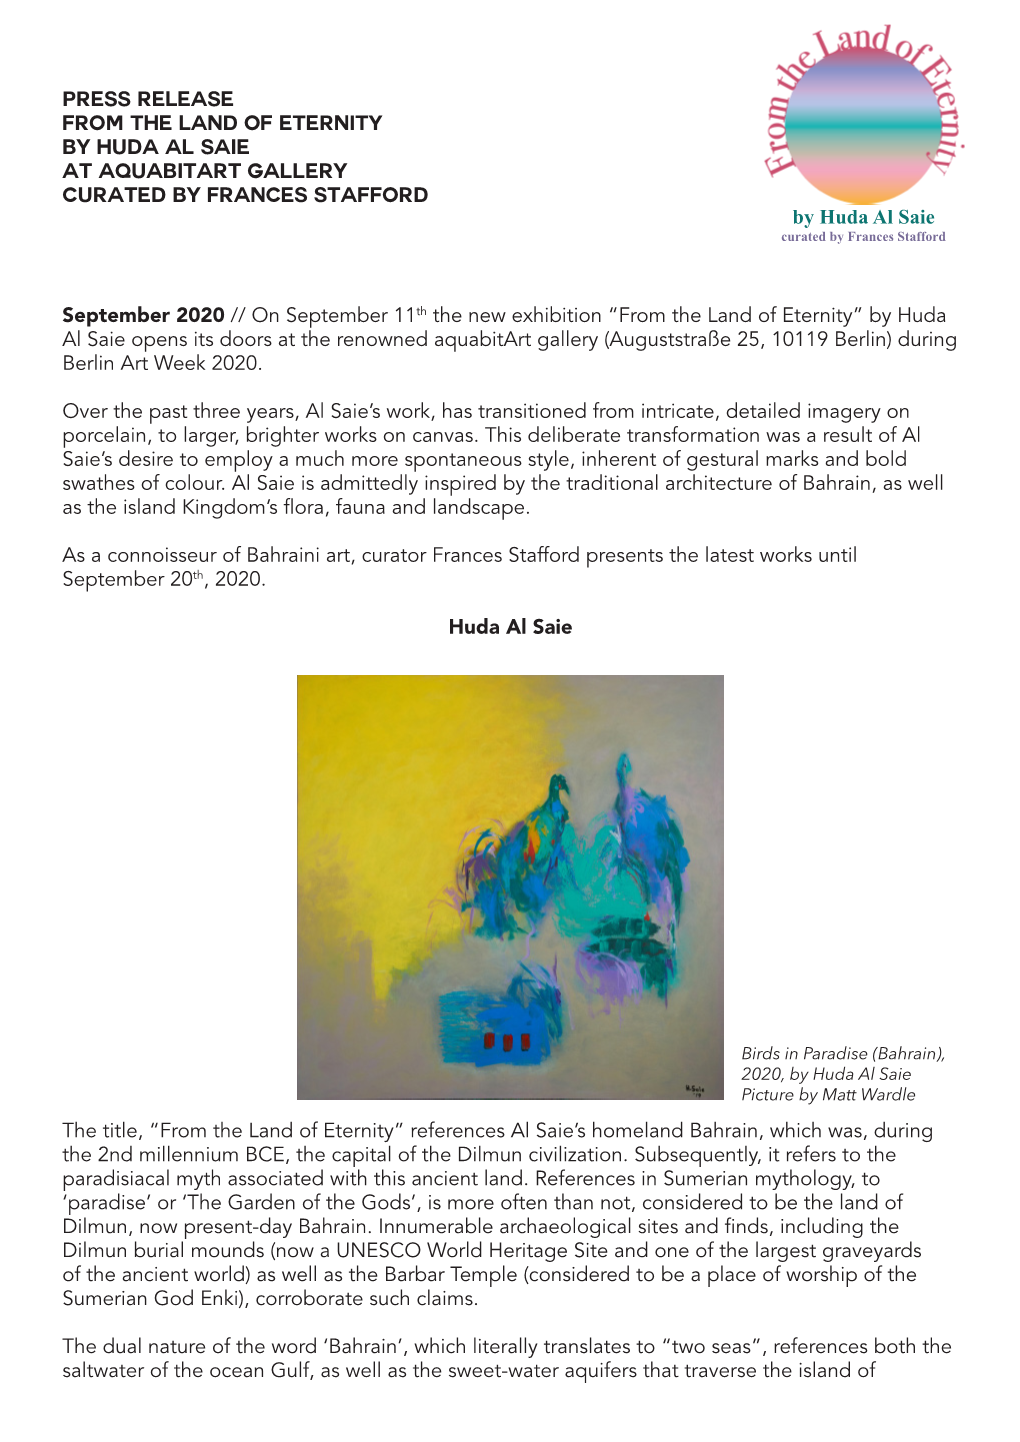 PRESS RELEASE from the Land of Eternity by Huda Al Saie at Aquabitart Gallery Curated by Frances Stafford September 2020 // on S